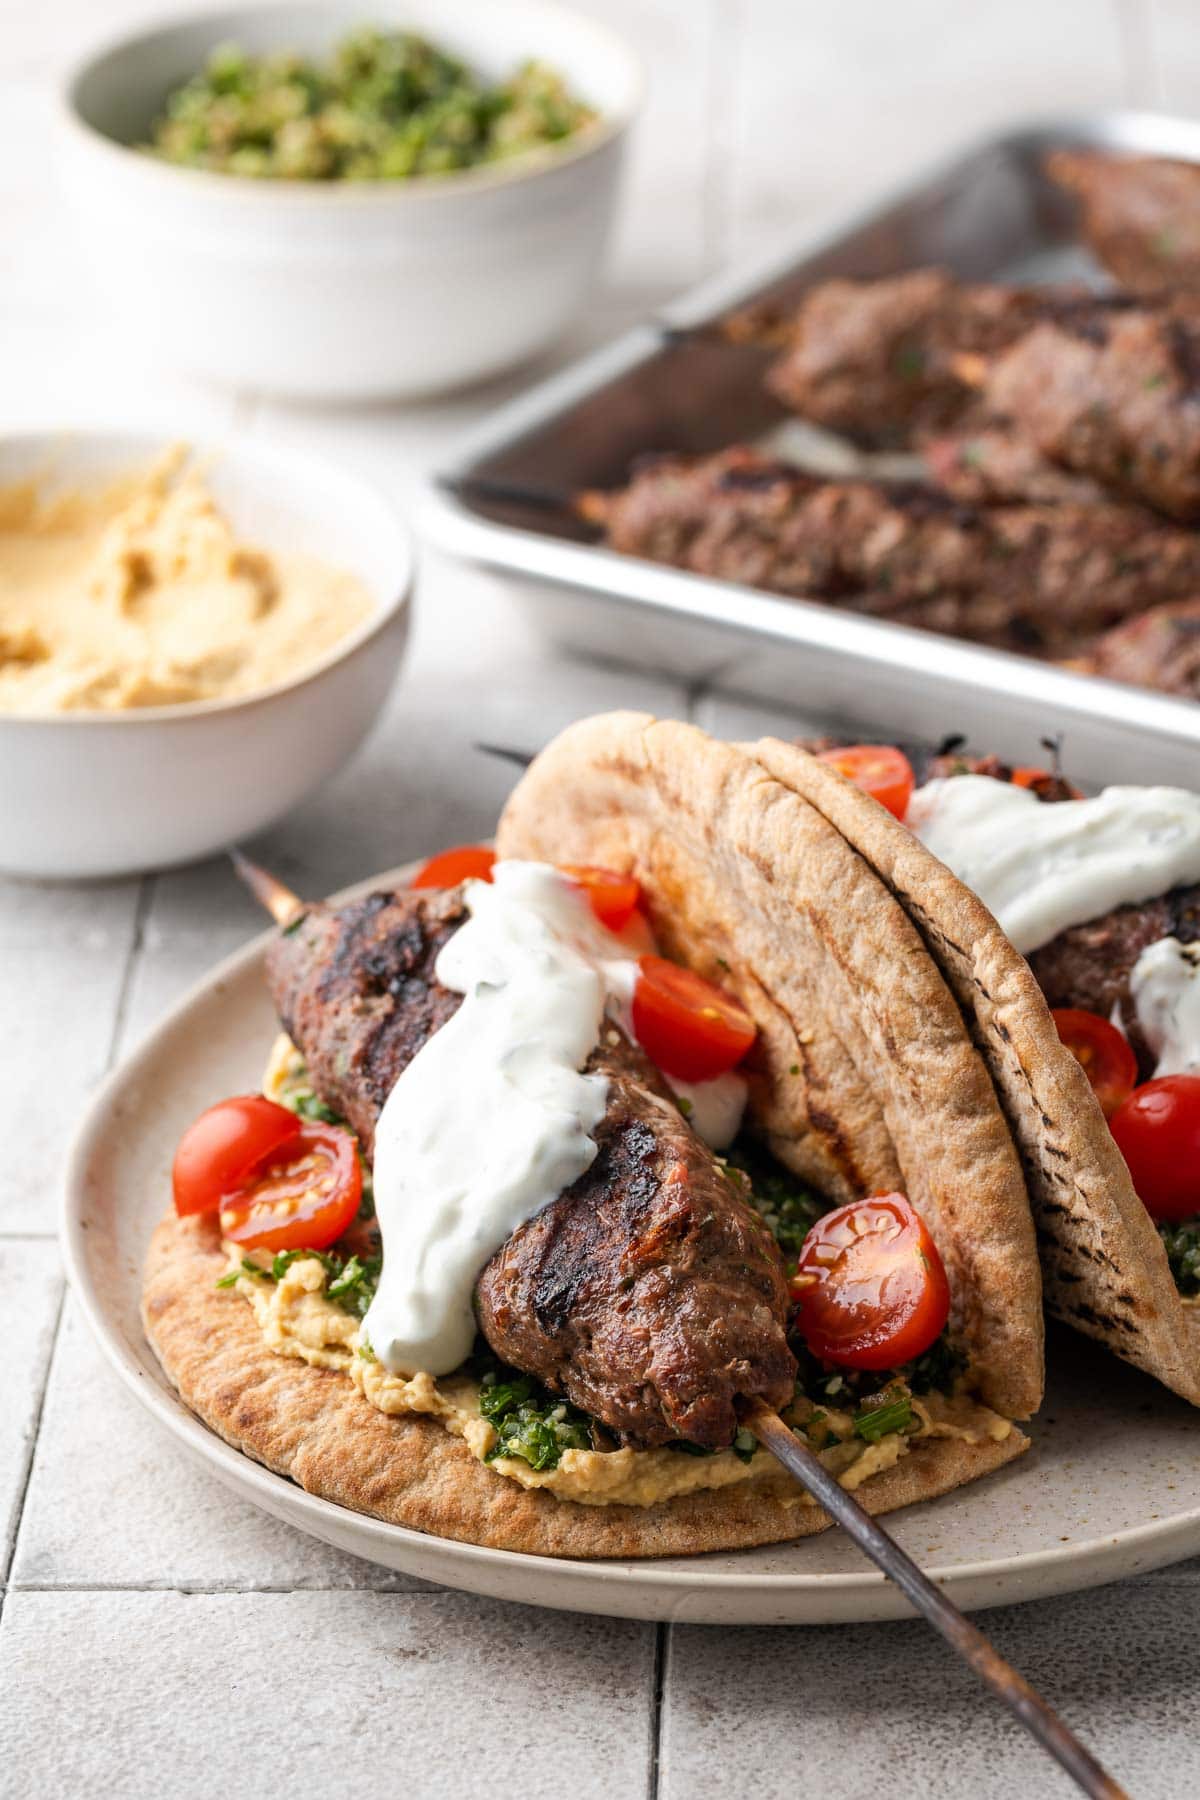 Ground beef kafta in a pita with tzatziki sauce and cherry tomatoes.